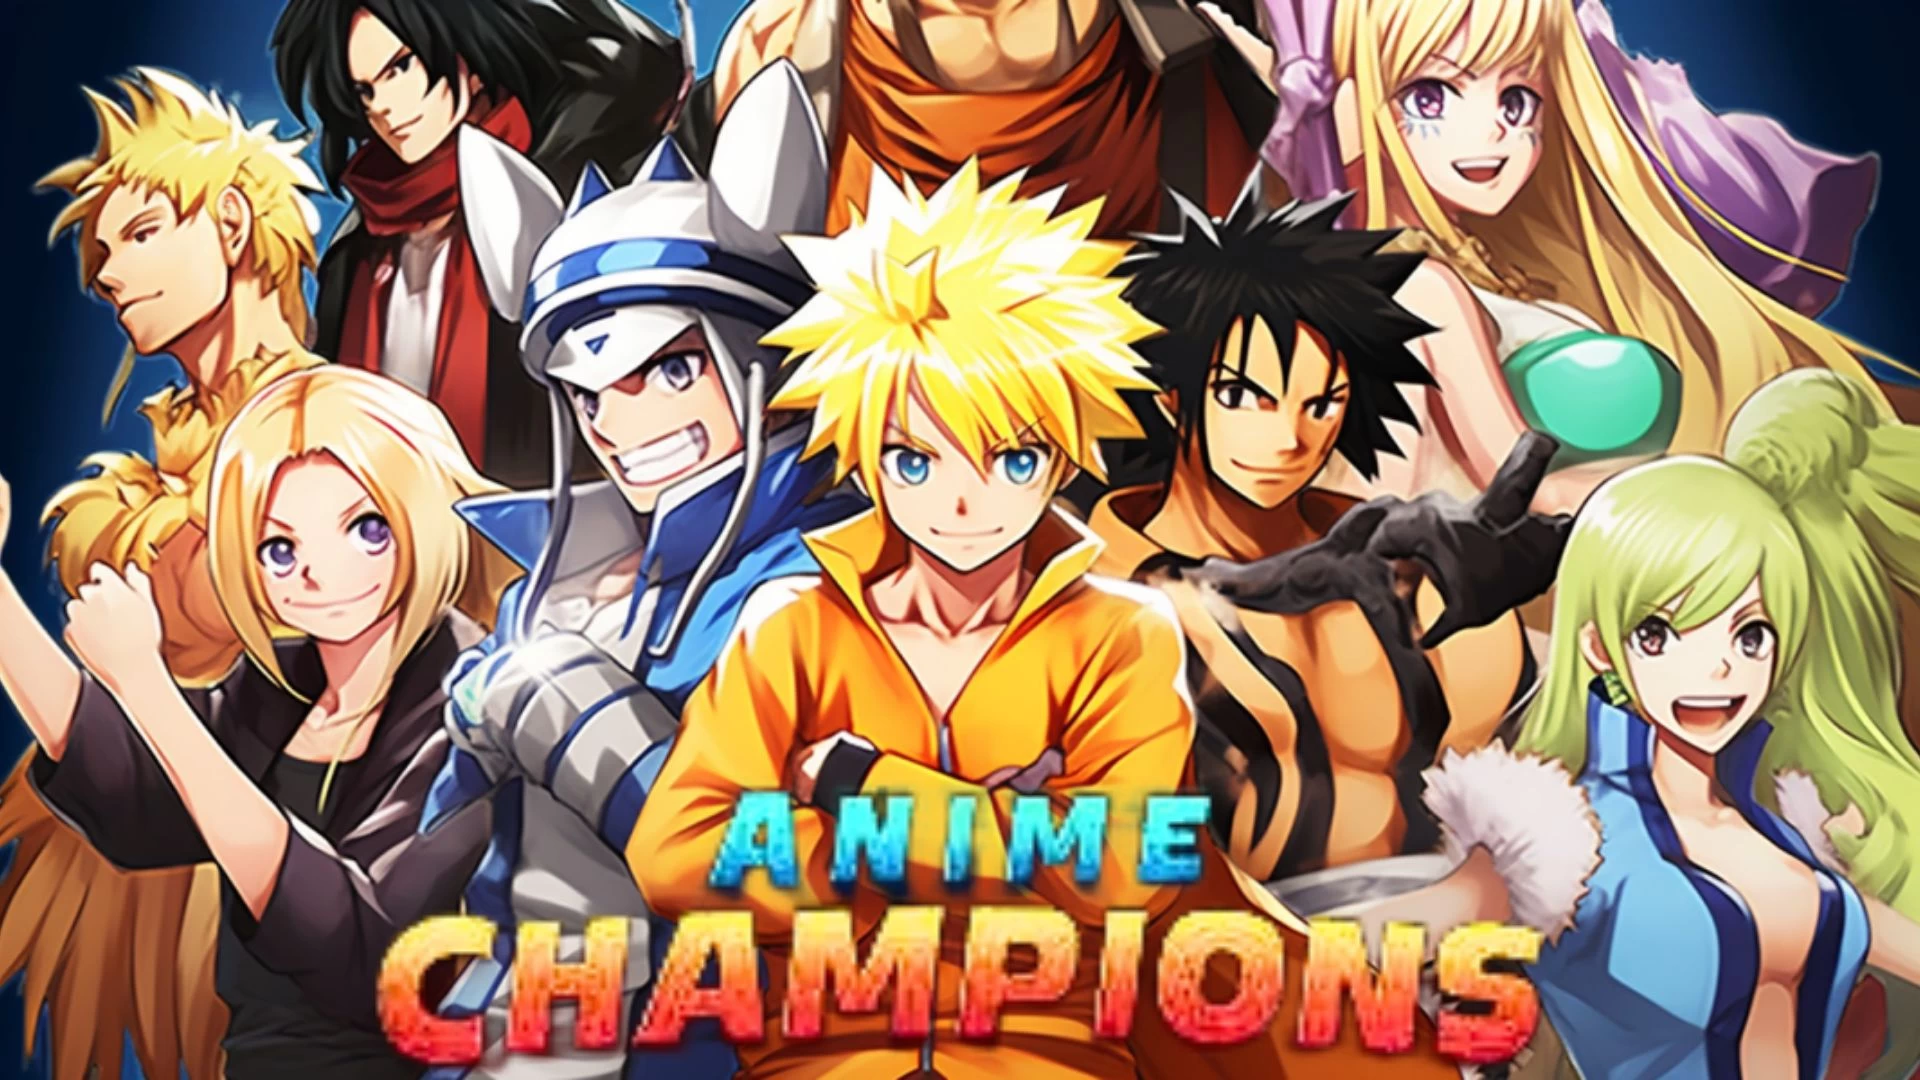 Anime Champions Simulator Quirk Tier List 2023 - A Complete Guide